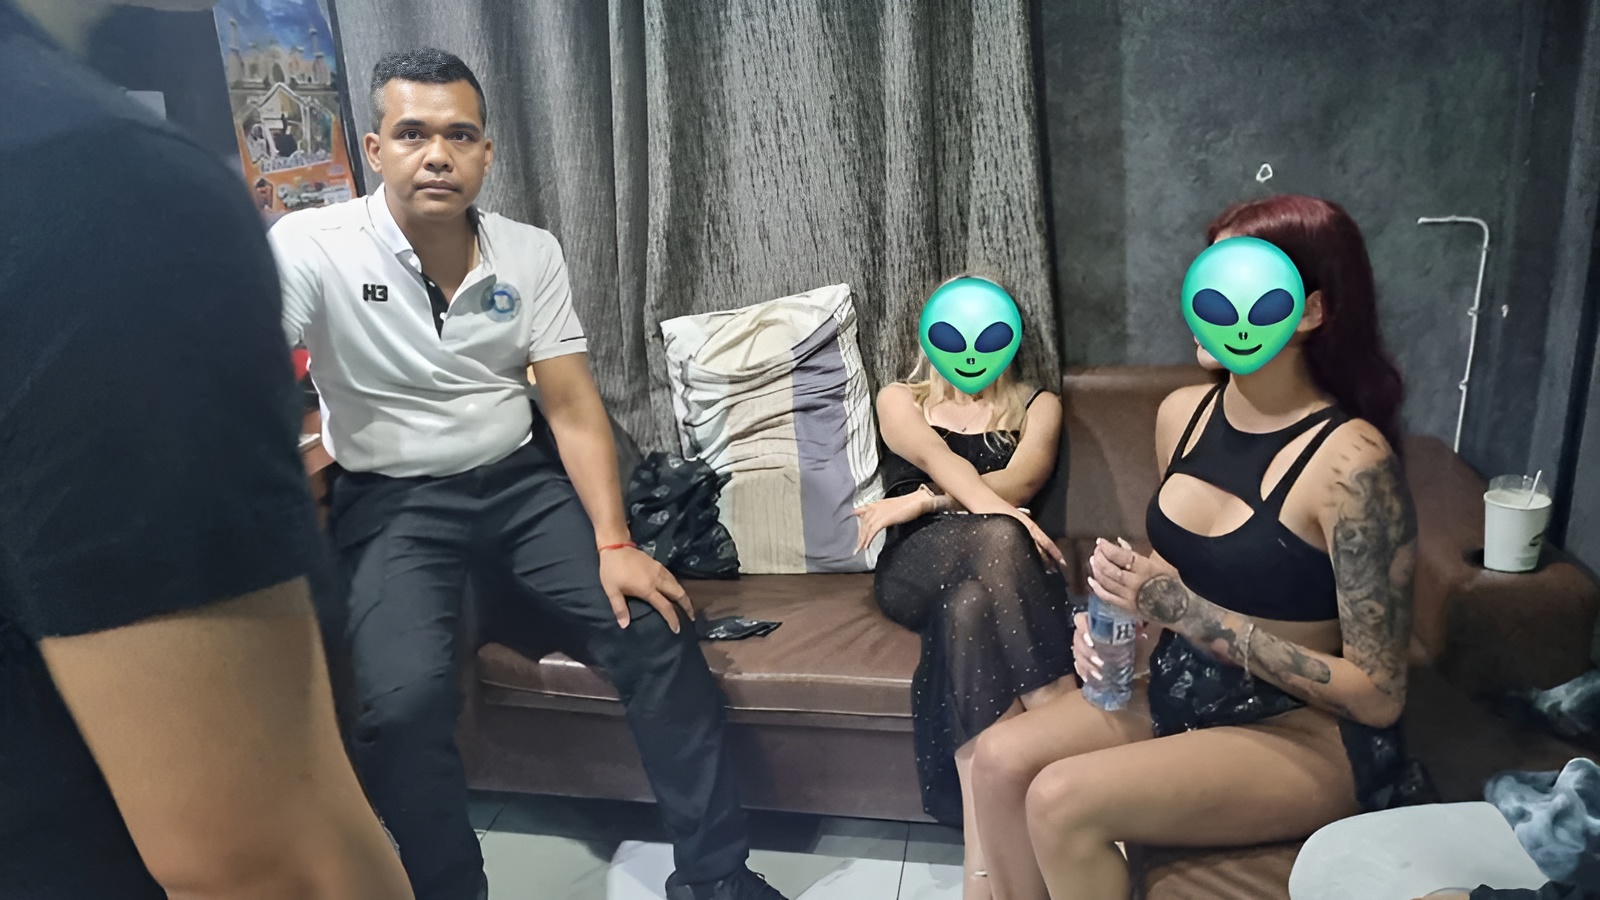 Two Russian nationals arrested for prostitution in Phuket